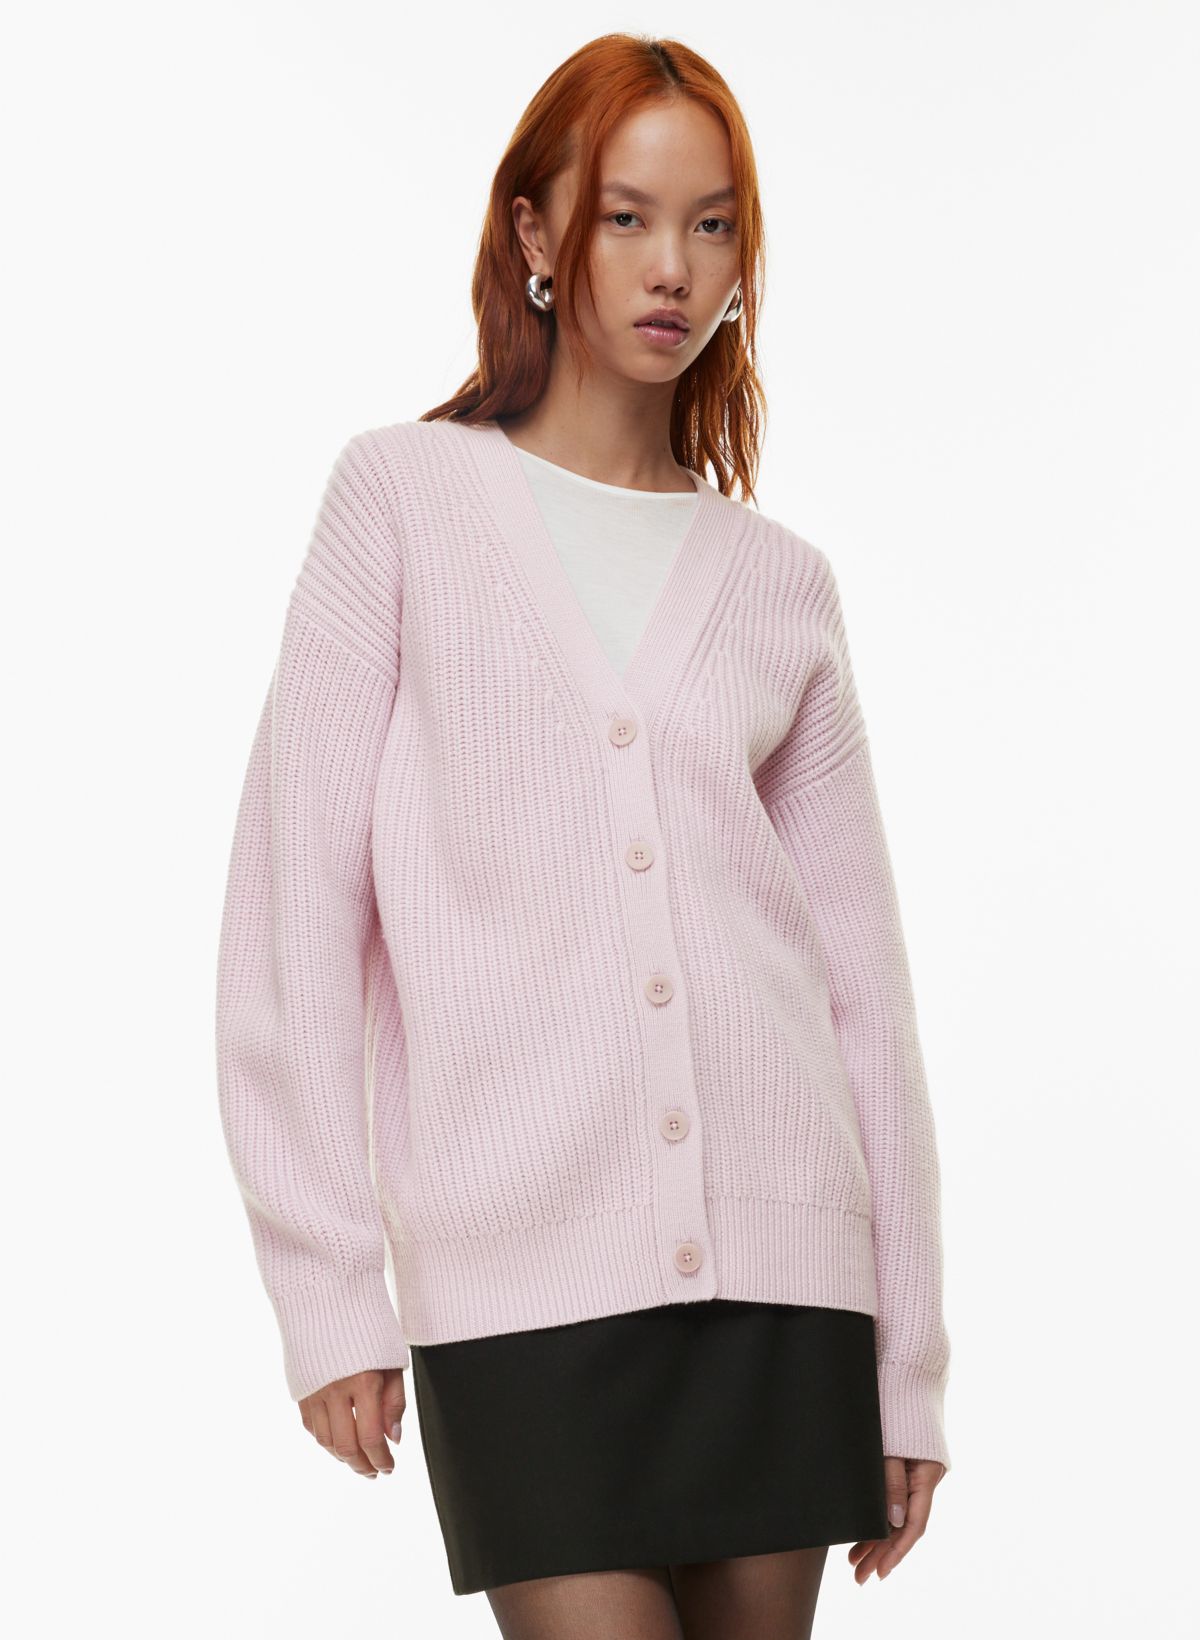 Gifts Under 30 Dollars for Adults Cardigan for Women Fall Winter